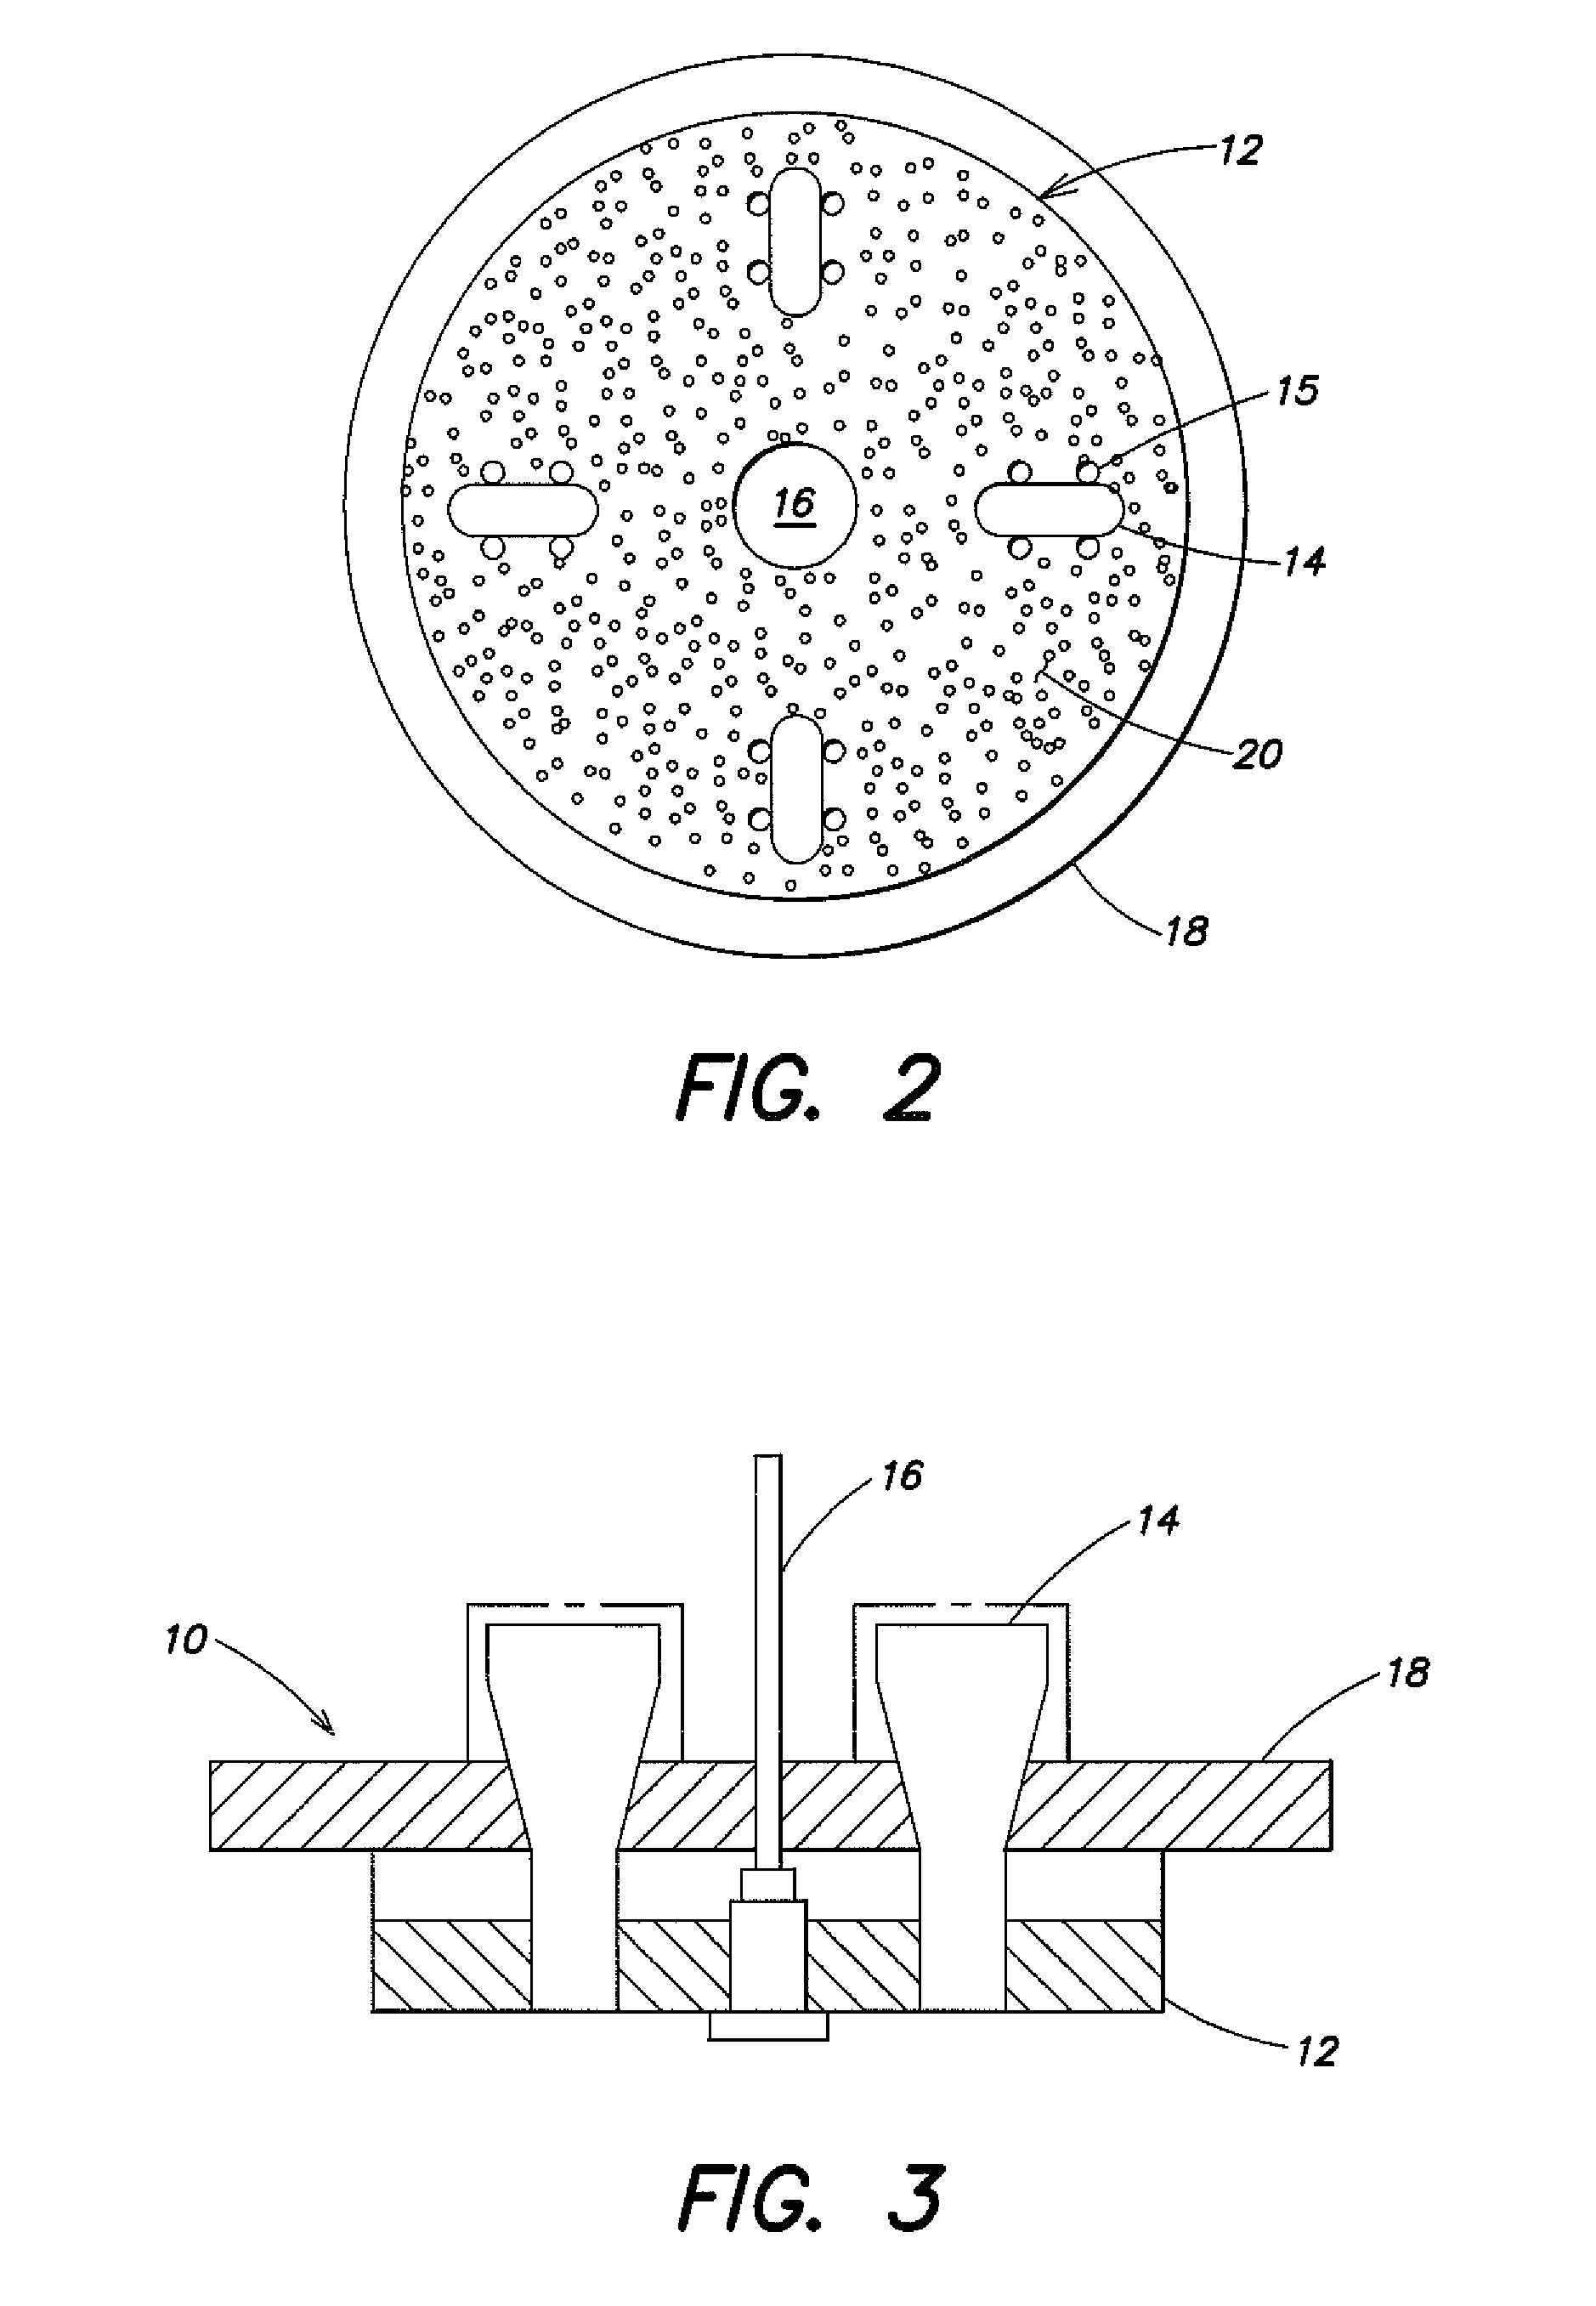 Methods and apparatus for sensing characteristics of the contents of a process abatement reactor